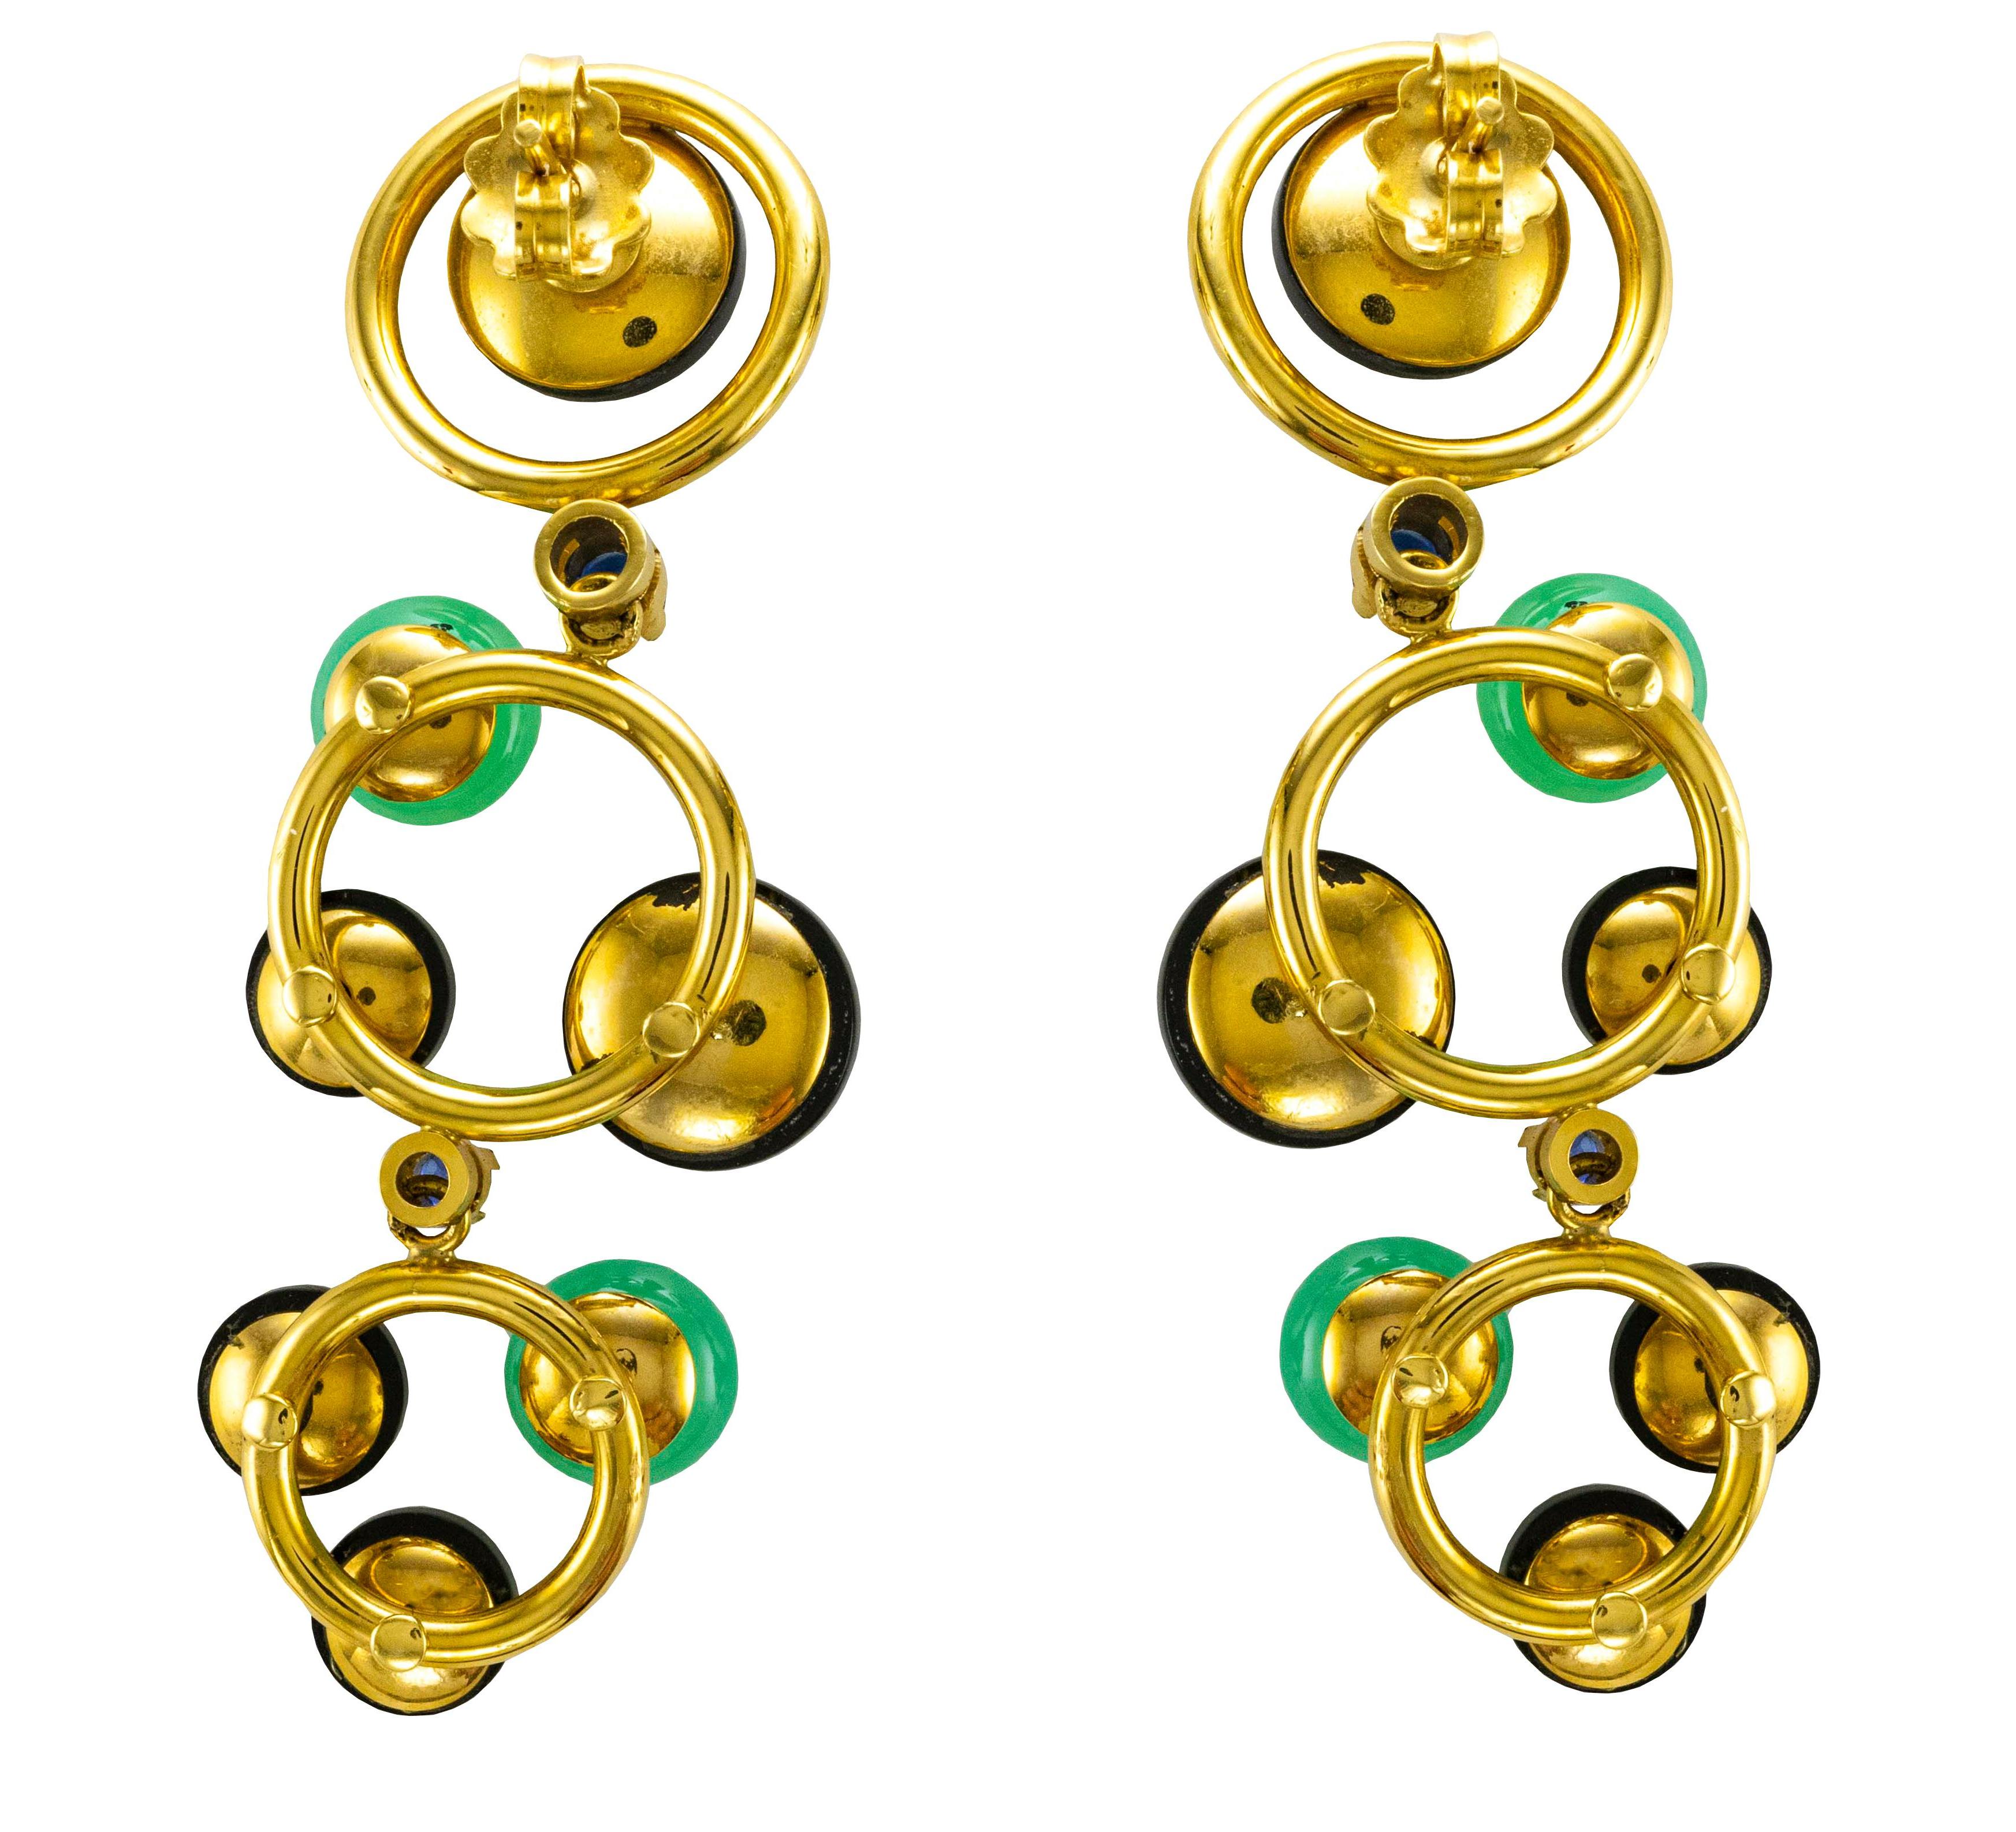 18 Karat yellow gold articulate drop earrings made up of three gold circles, Onyx discs and cabochon cut Chrysoprase.
Embellished with Diamonds ( ct 0.15 ), Rubies ( ct 0.42 ) and two Sapphires.
This earrings has a remarkable Seventies inspiration